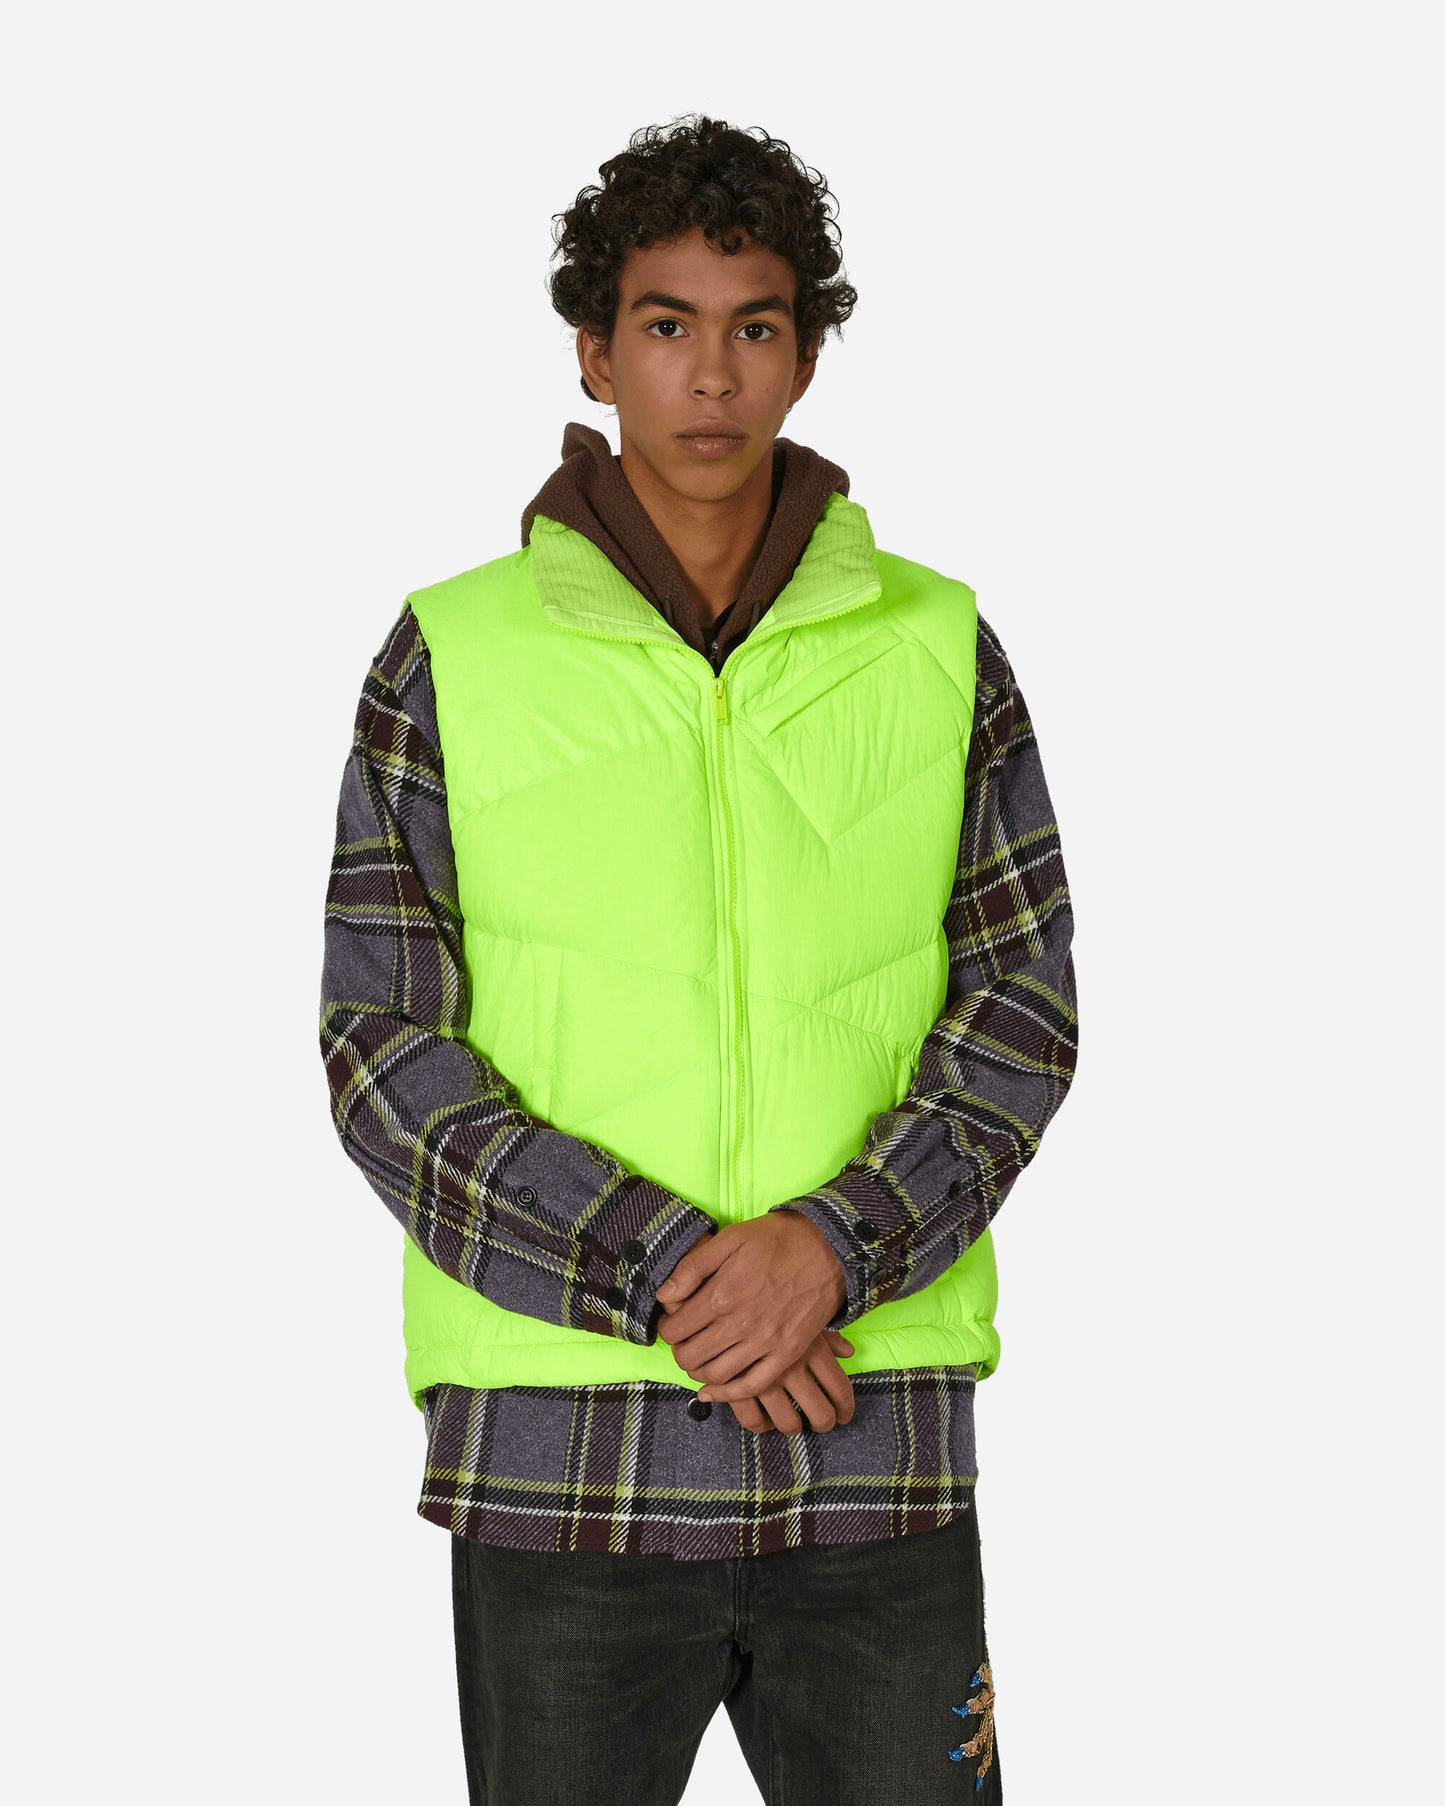 Undercover Down Vest Yellow Coats and Jackets Vests UC2C4002-1 1